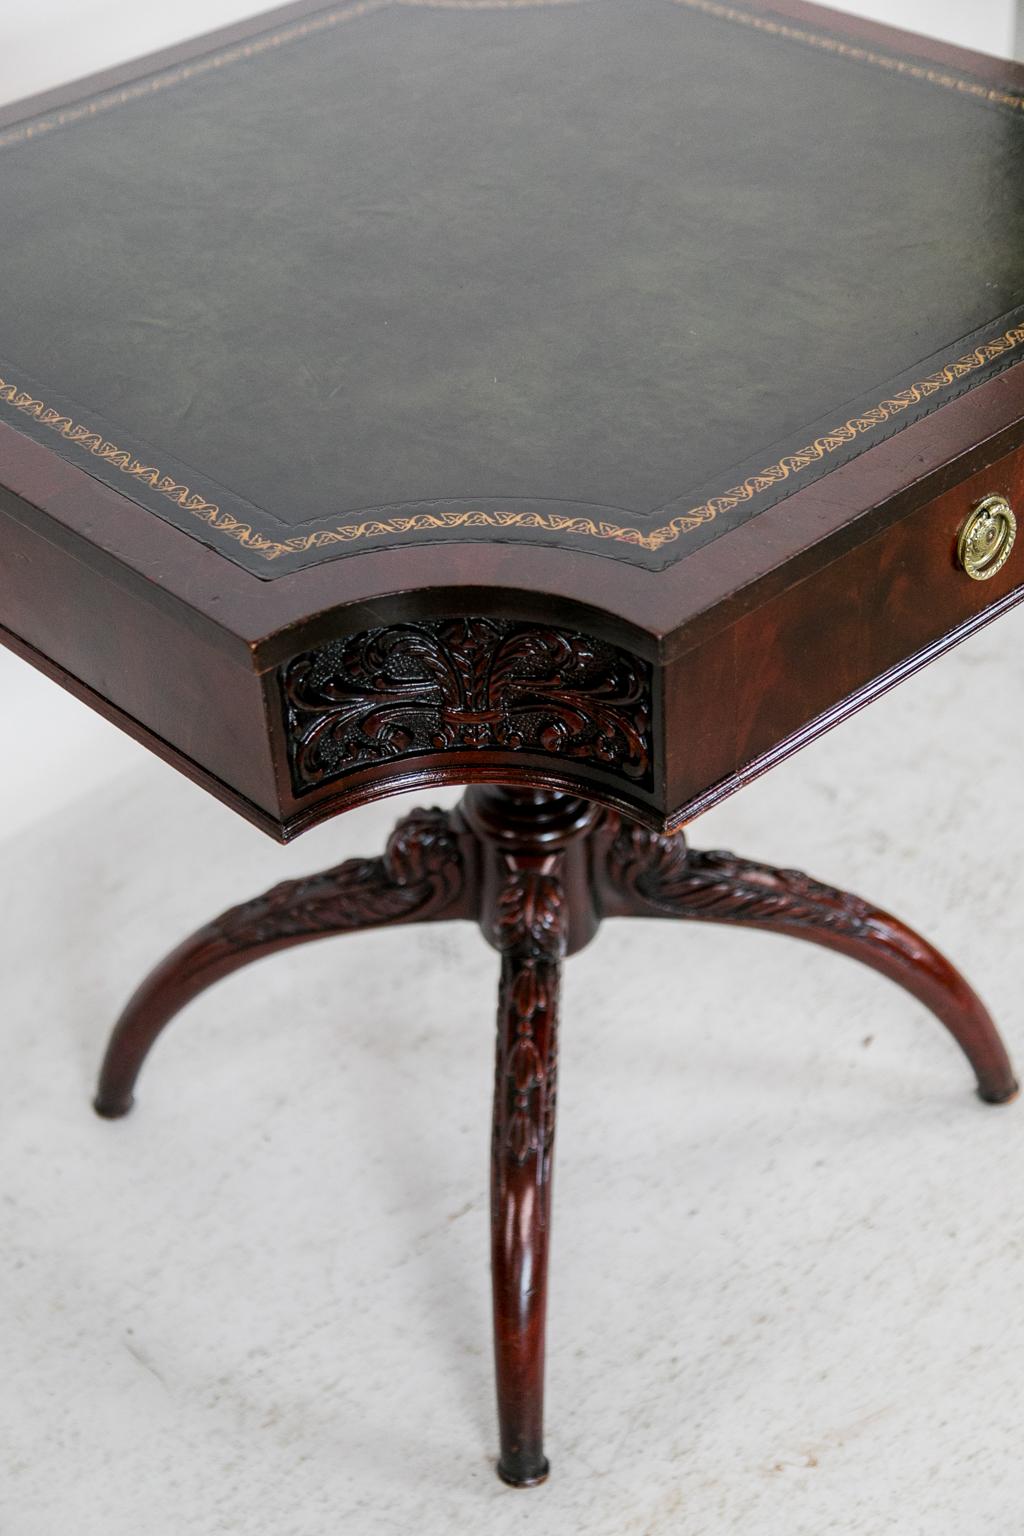 Leather Top Center Table In Good Condition For Sale In Wilson, NC